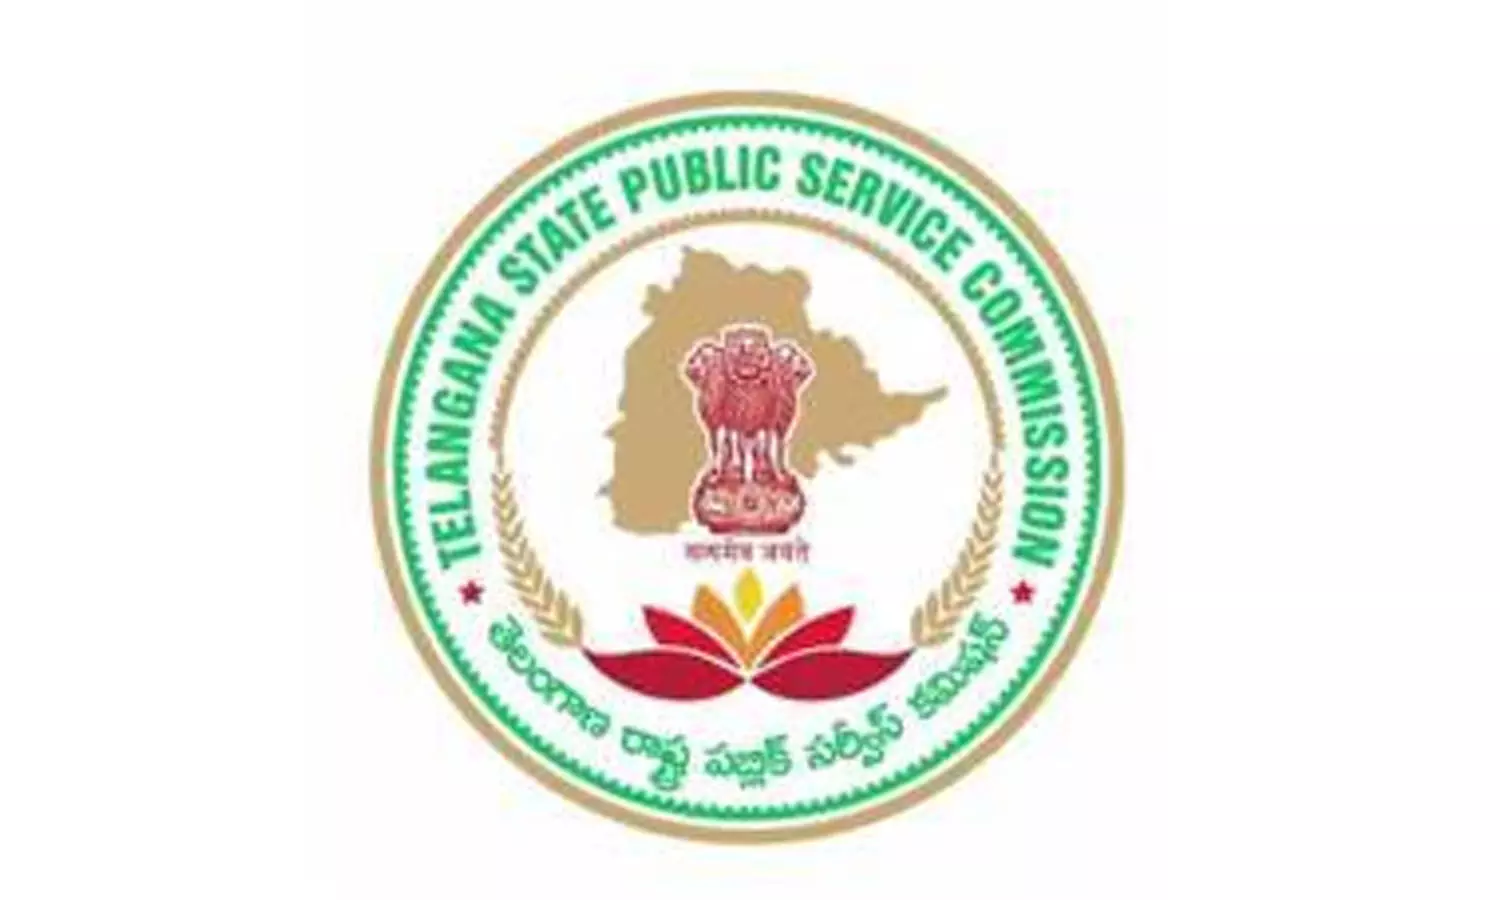 TSPSC paper leak: New question papers for upcoming exams, no change in schedule